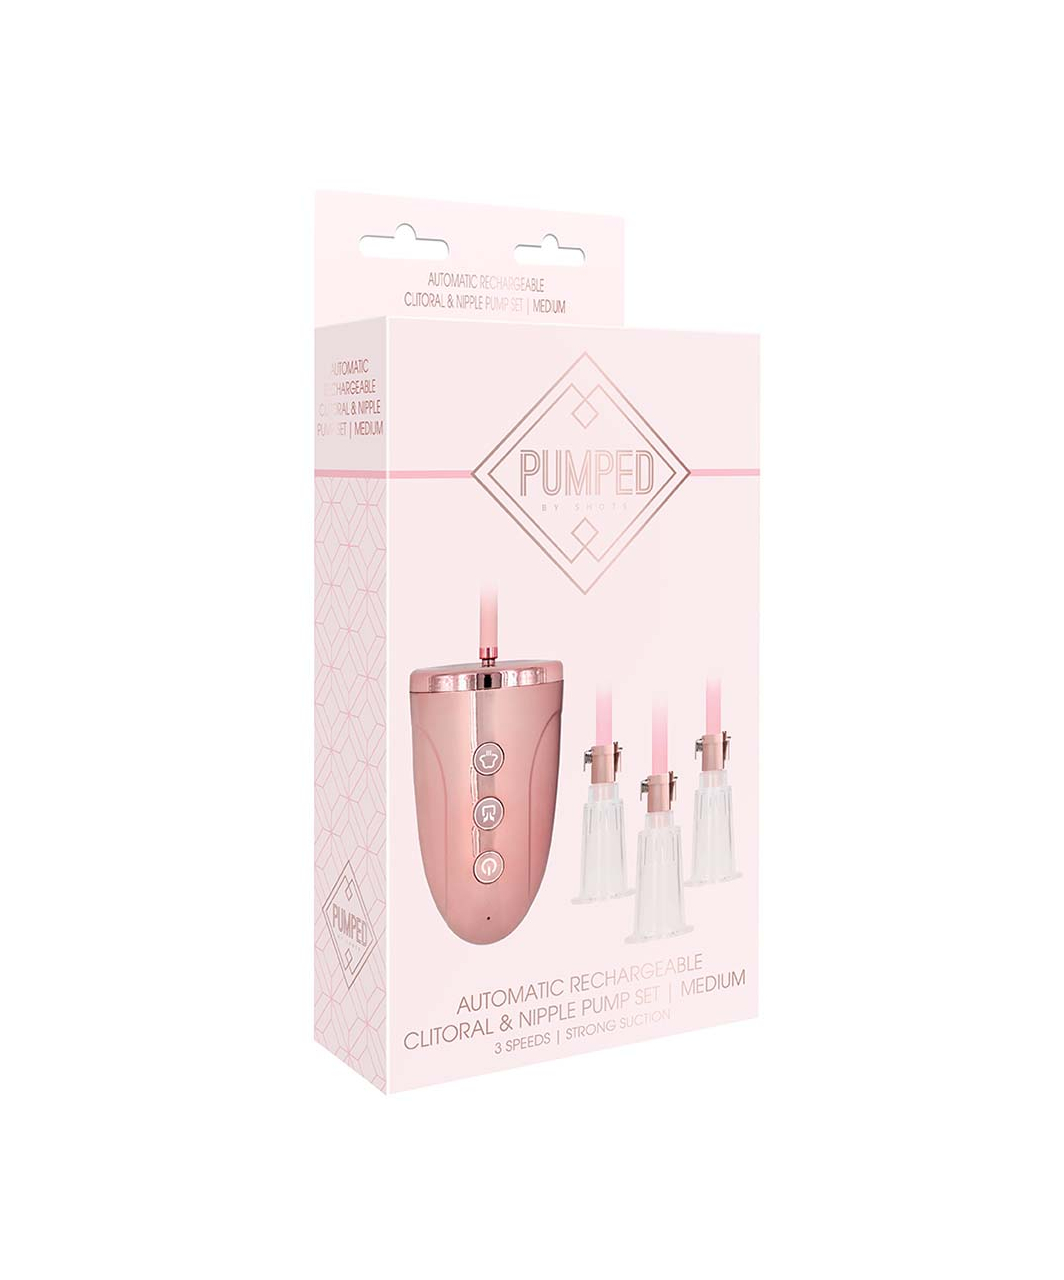 Shots Toys Pumped Automatic Rechargeable Clitoral & Nipple Pump Set